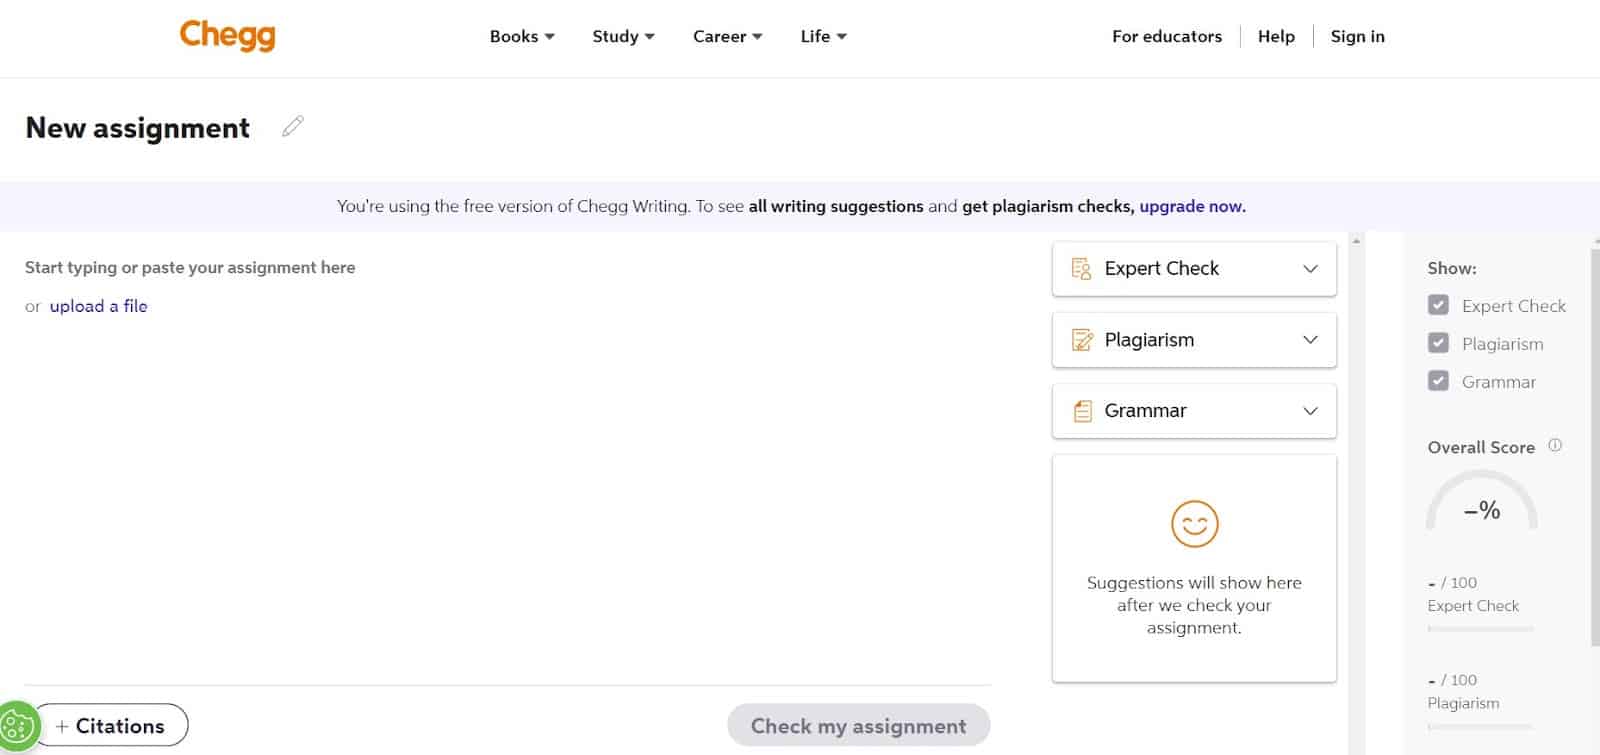 Workspace dashboard of chegg app to check the various options like plagiarism, grammar and expert check on the content